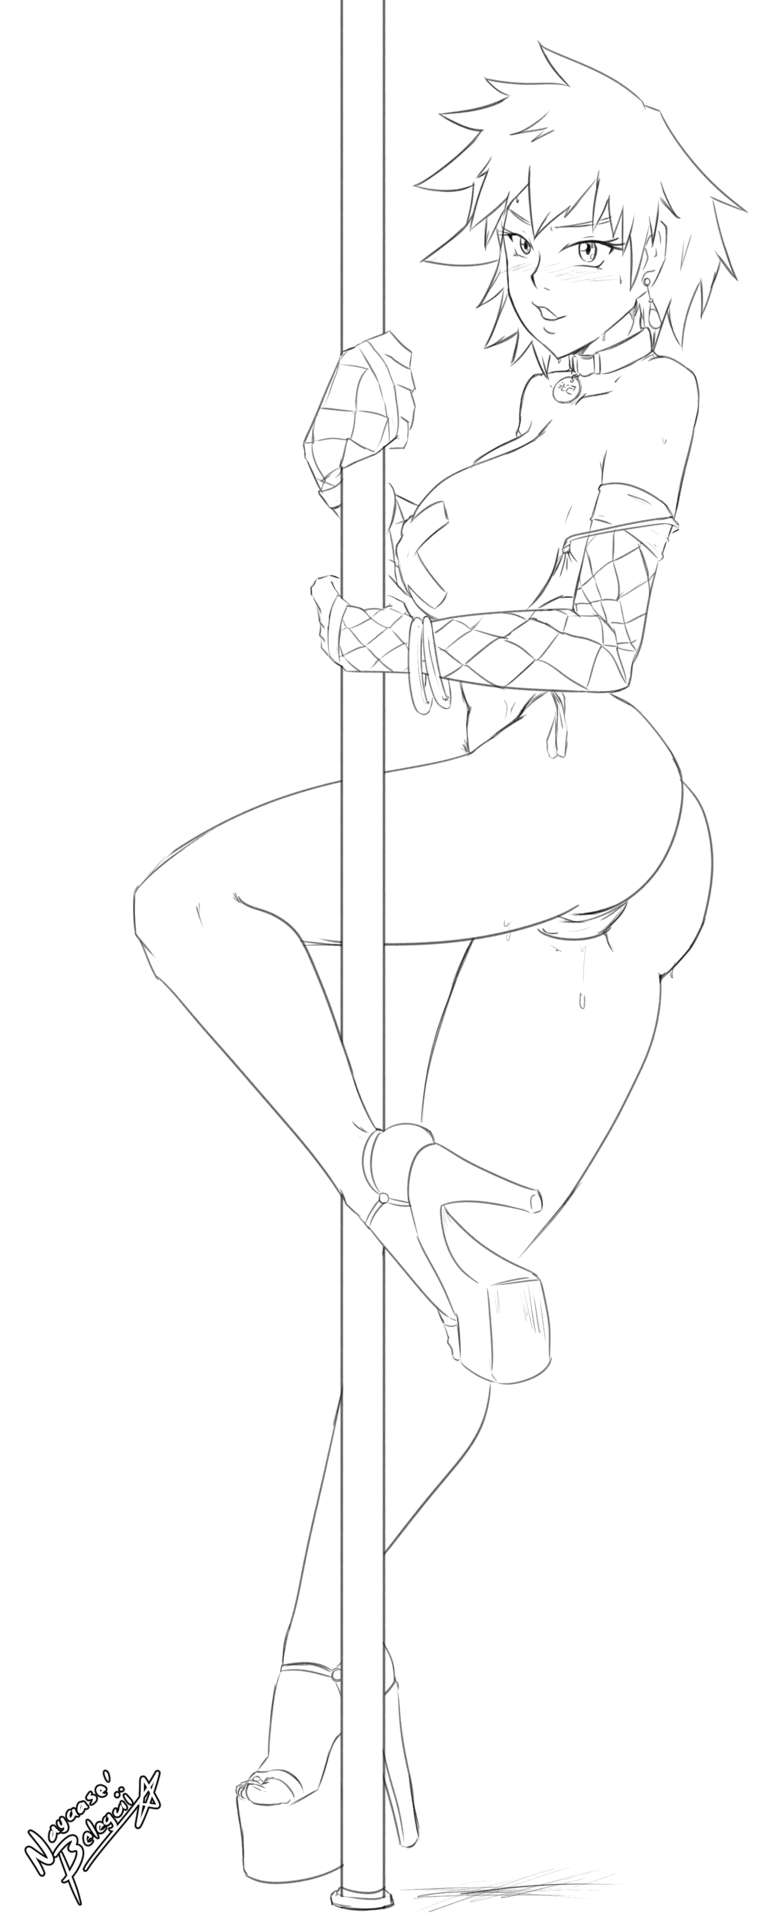 zapotecdarkstar: Best MILF in MHA  Fishnets are hard to draw, any tips on them? 